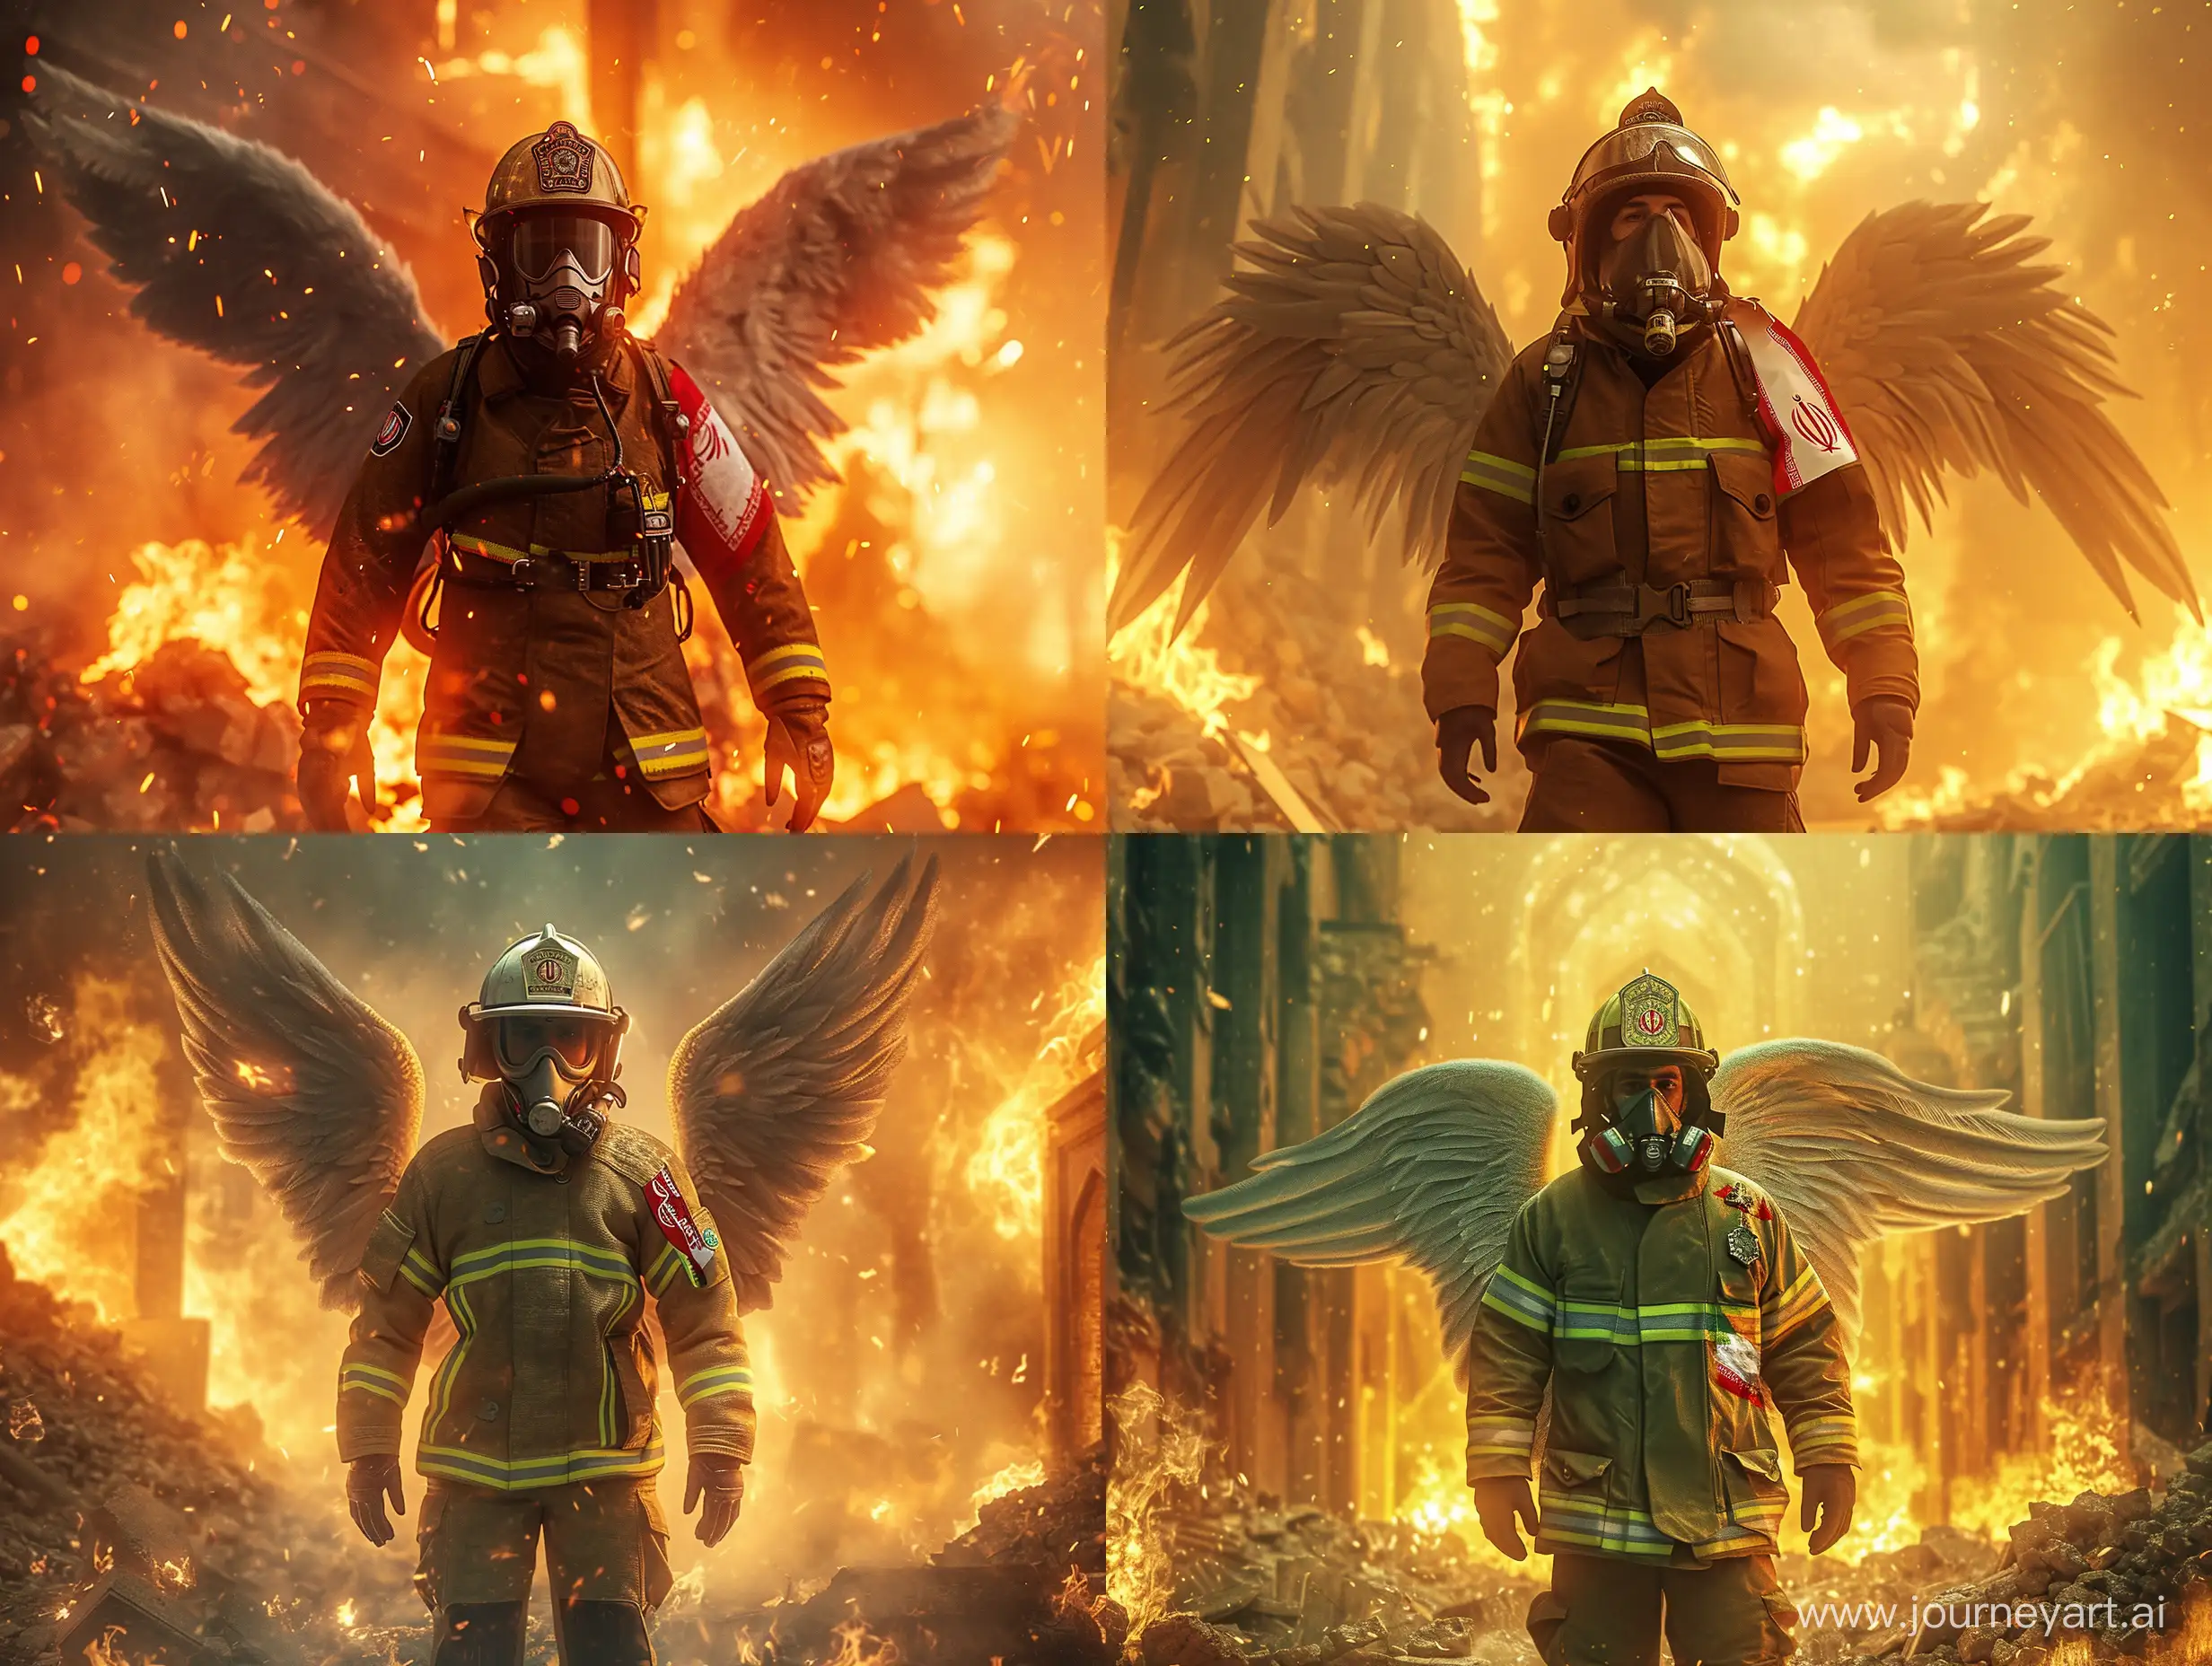 a firefighter stand in center of image, he has two wings in his back, front view, cinematic lighting and realistic, detailed, iran flag clothing etiquette on his arm, A collapsing and burning building in the background, add firefighter mask on his face